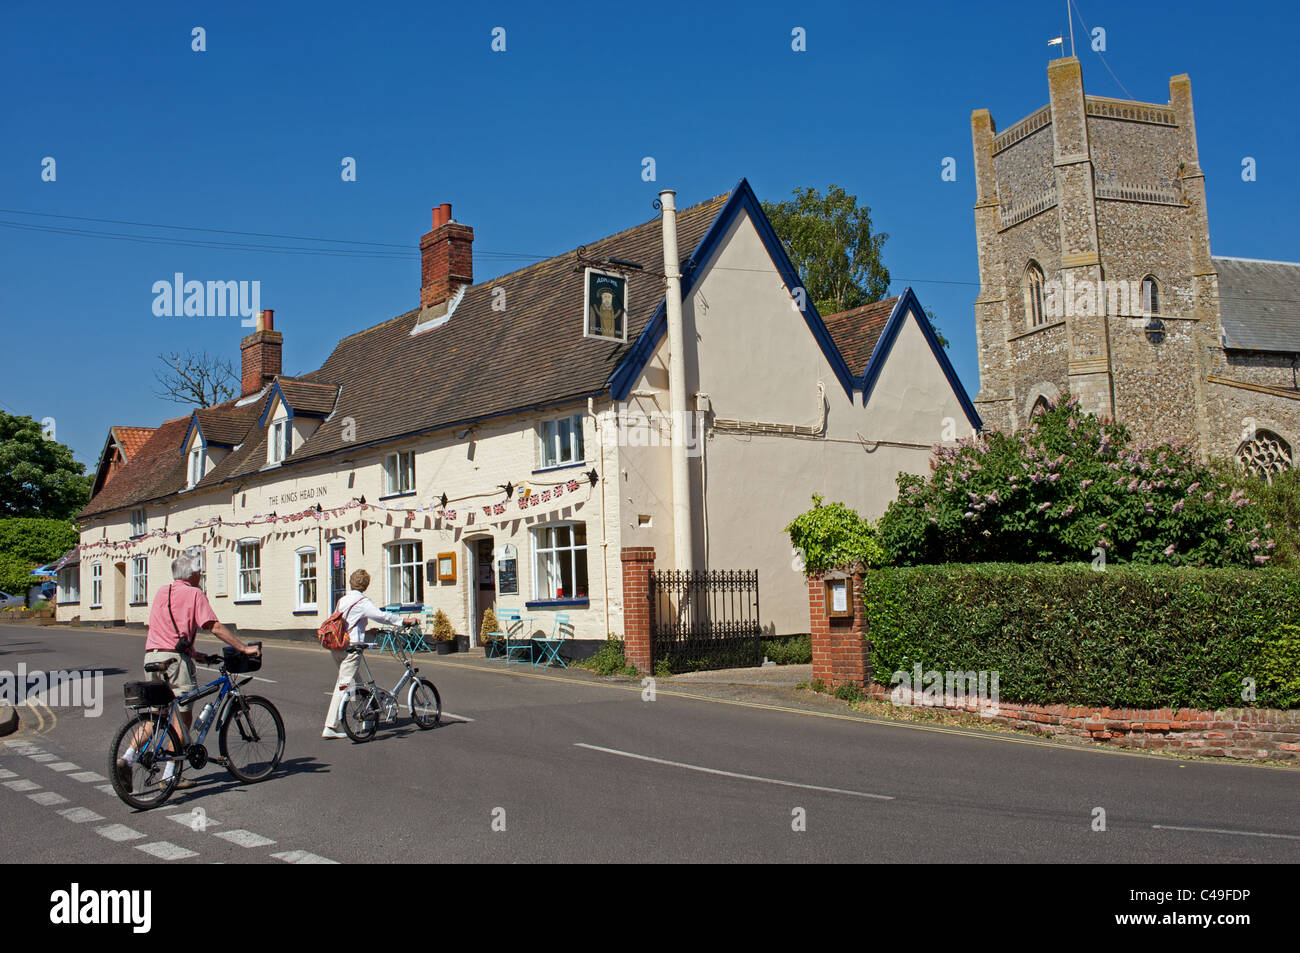 Kings Head public house, Orford, Suffolk, UK. Stock Photo